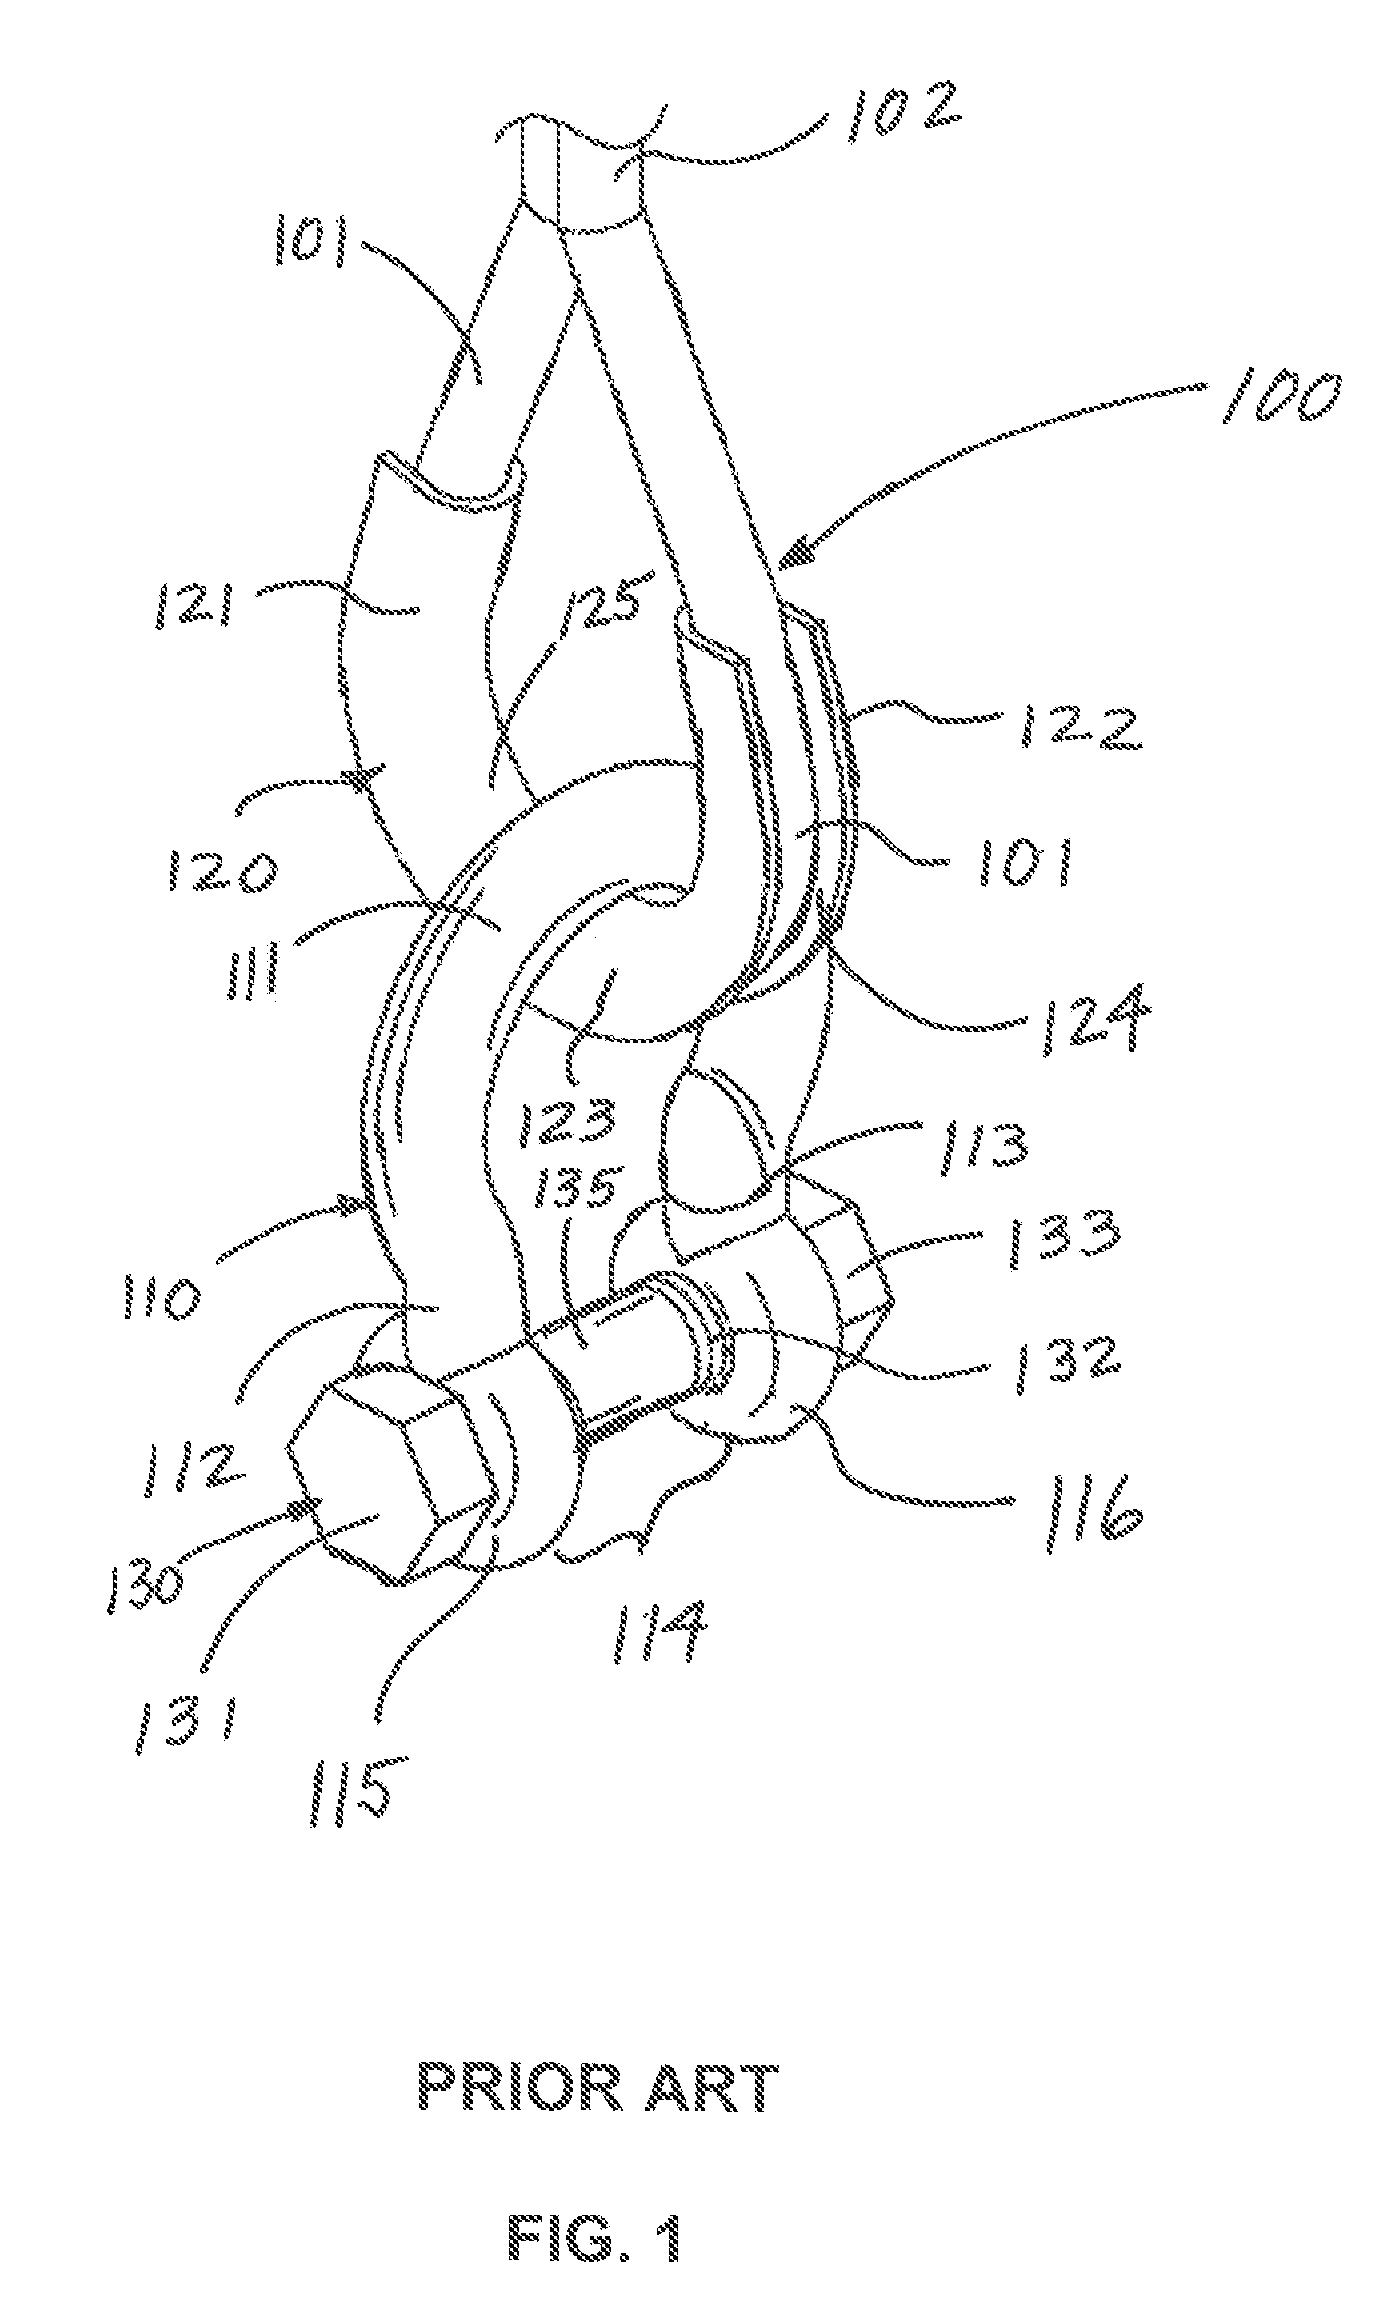 Capture block assembly for retaining shackles